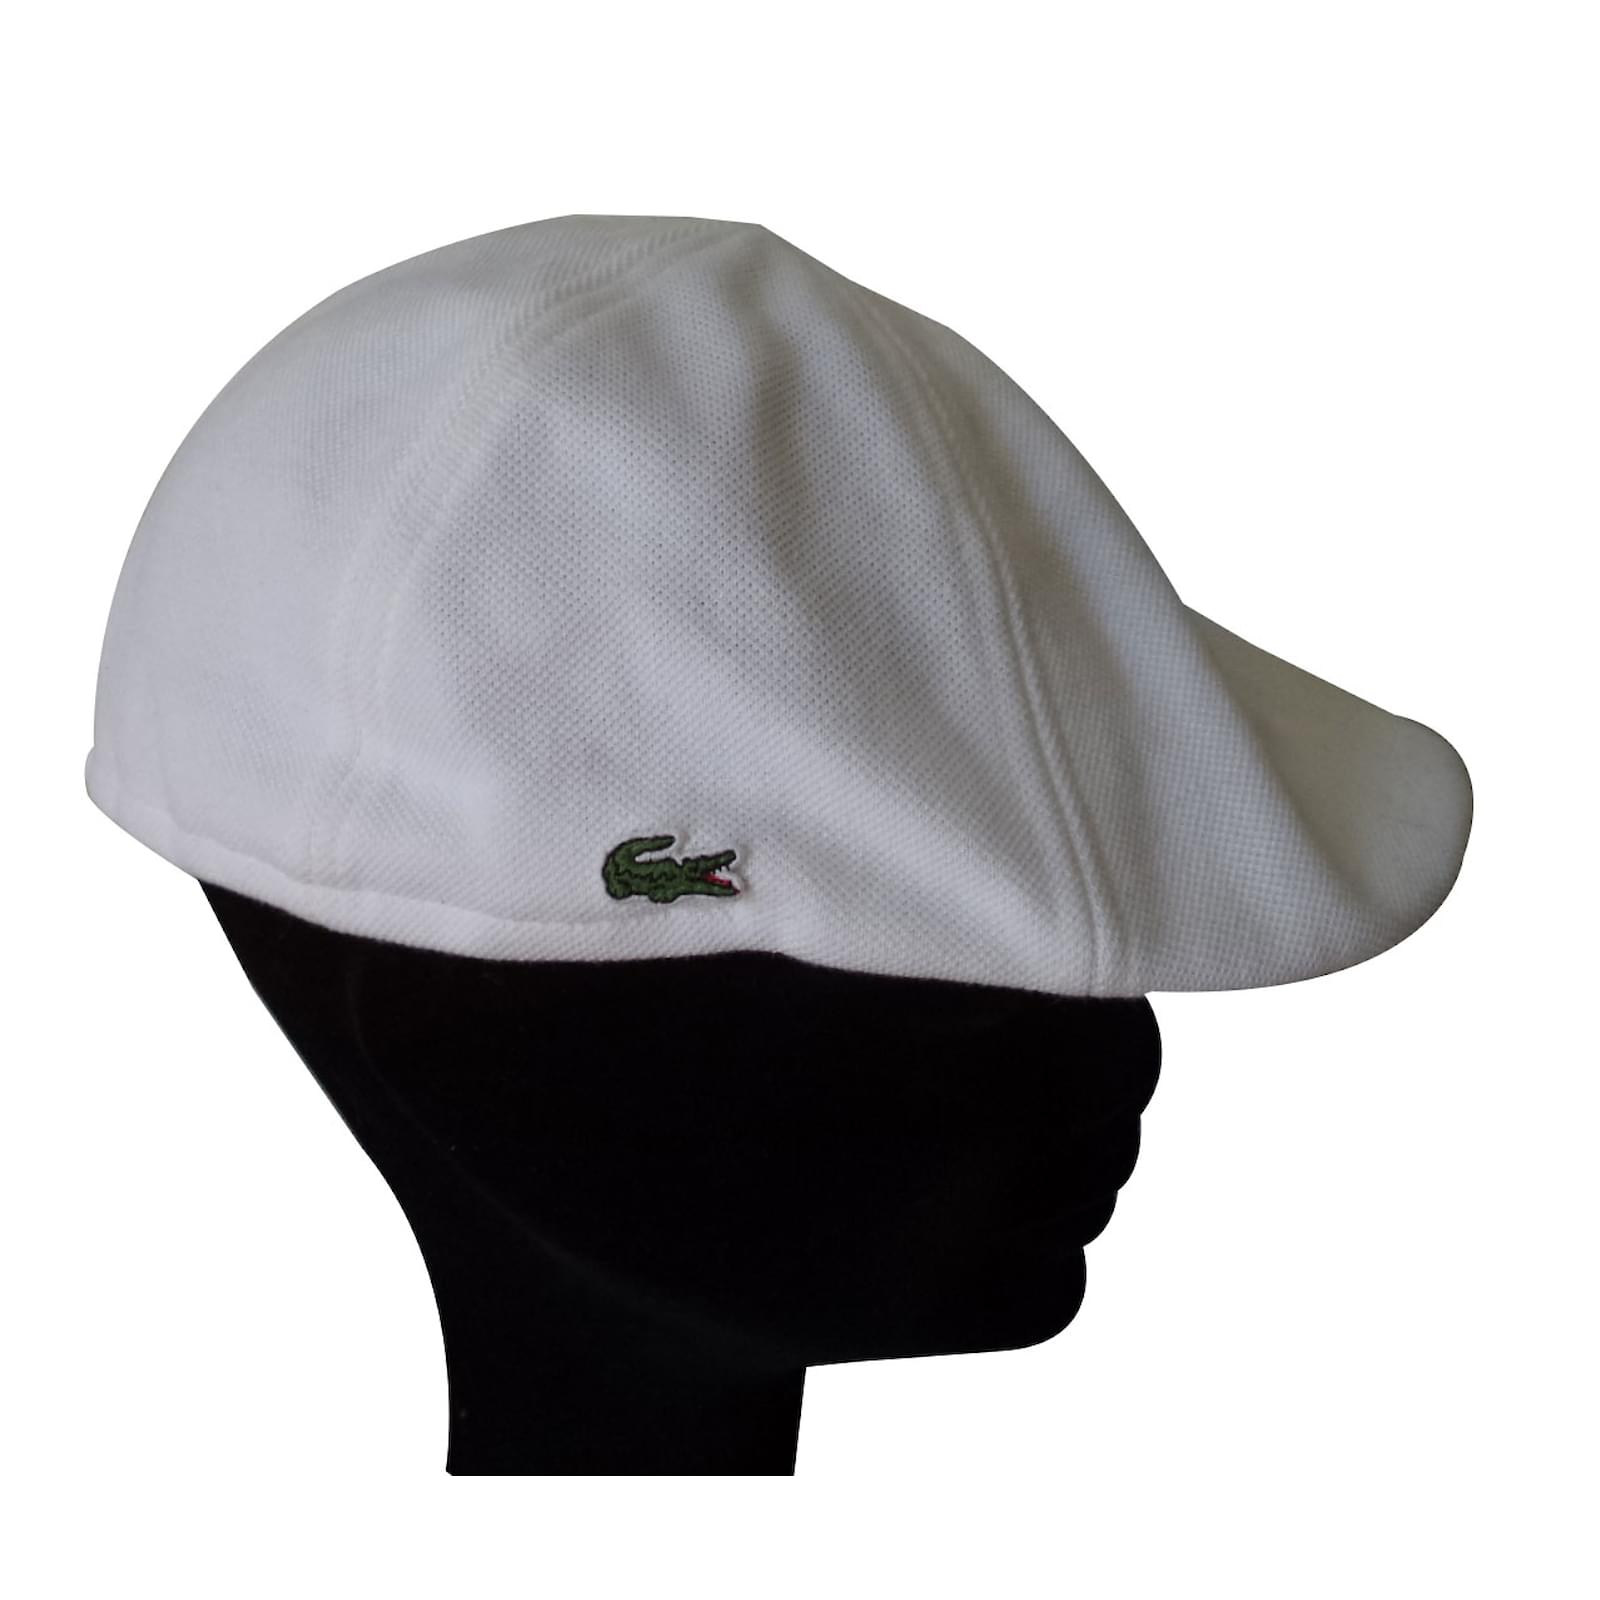 lacoste beanies